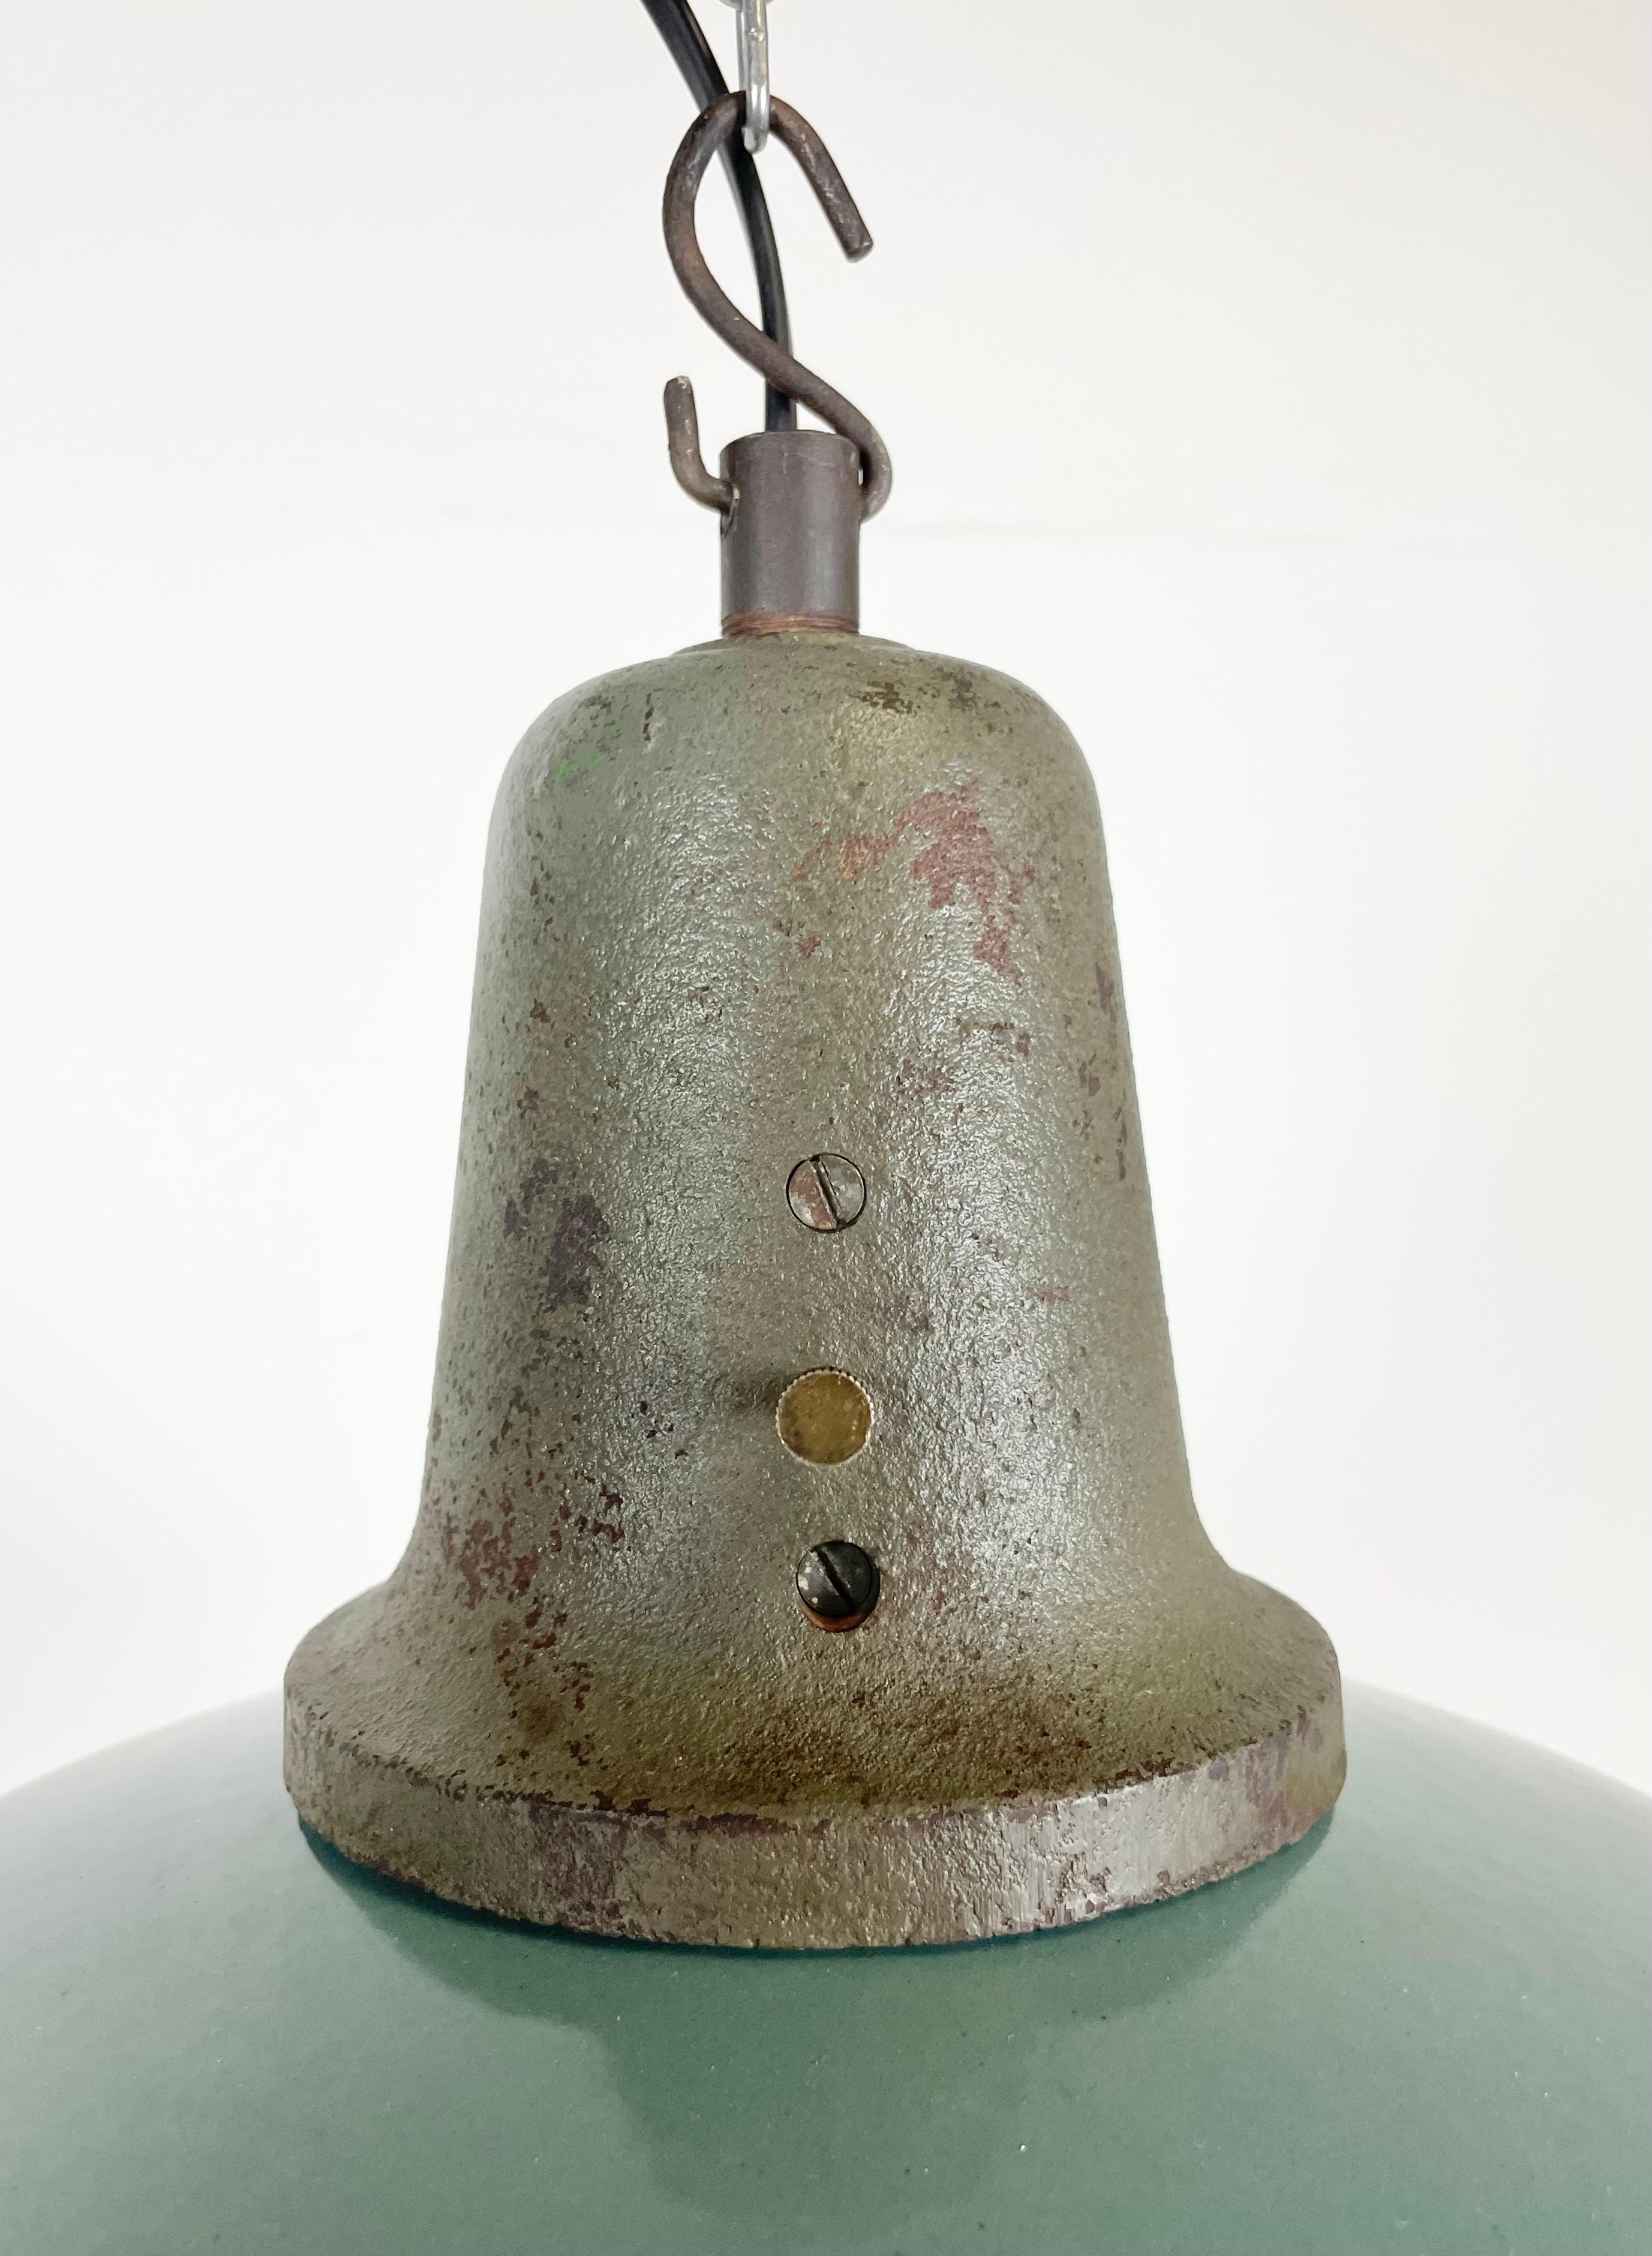 Polish Industrial Petrol Enamel Factory Lamp with Cast Iron Top, 1960s For Sale